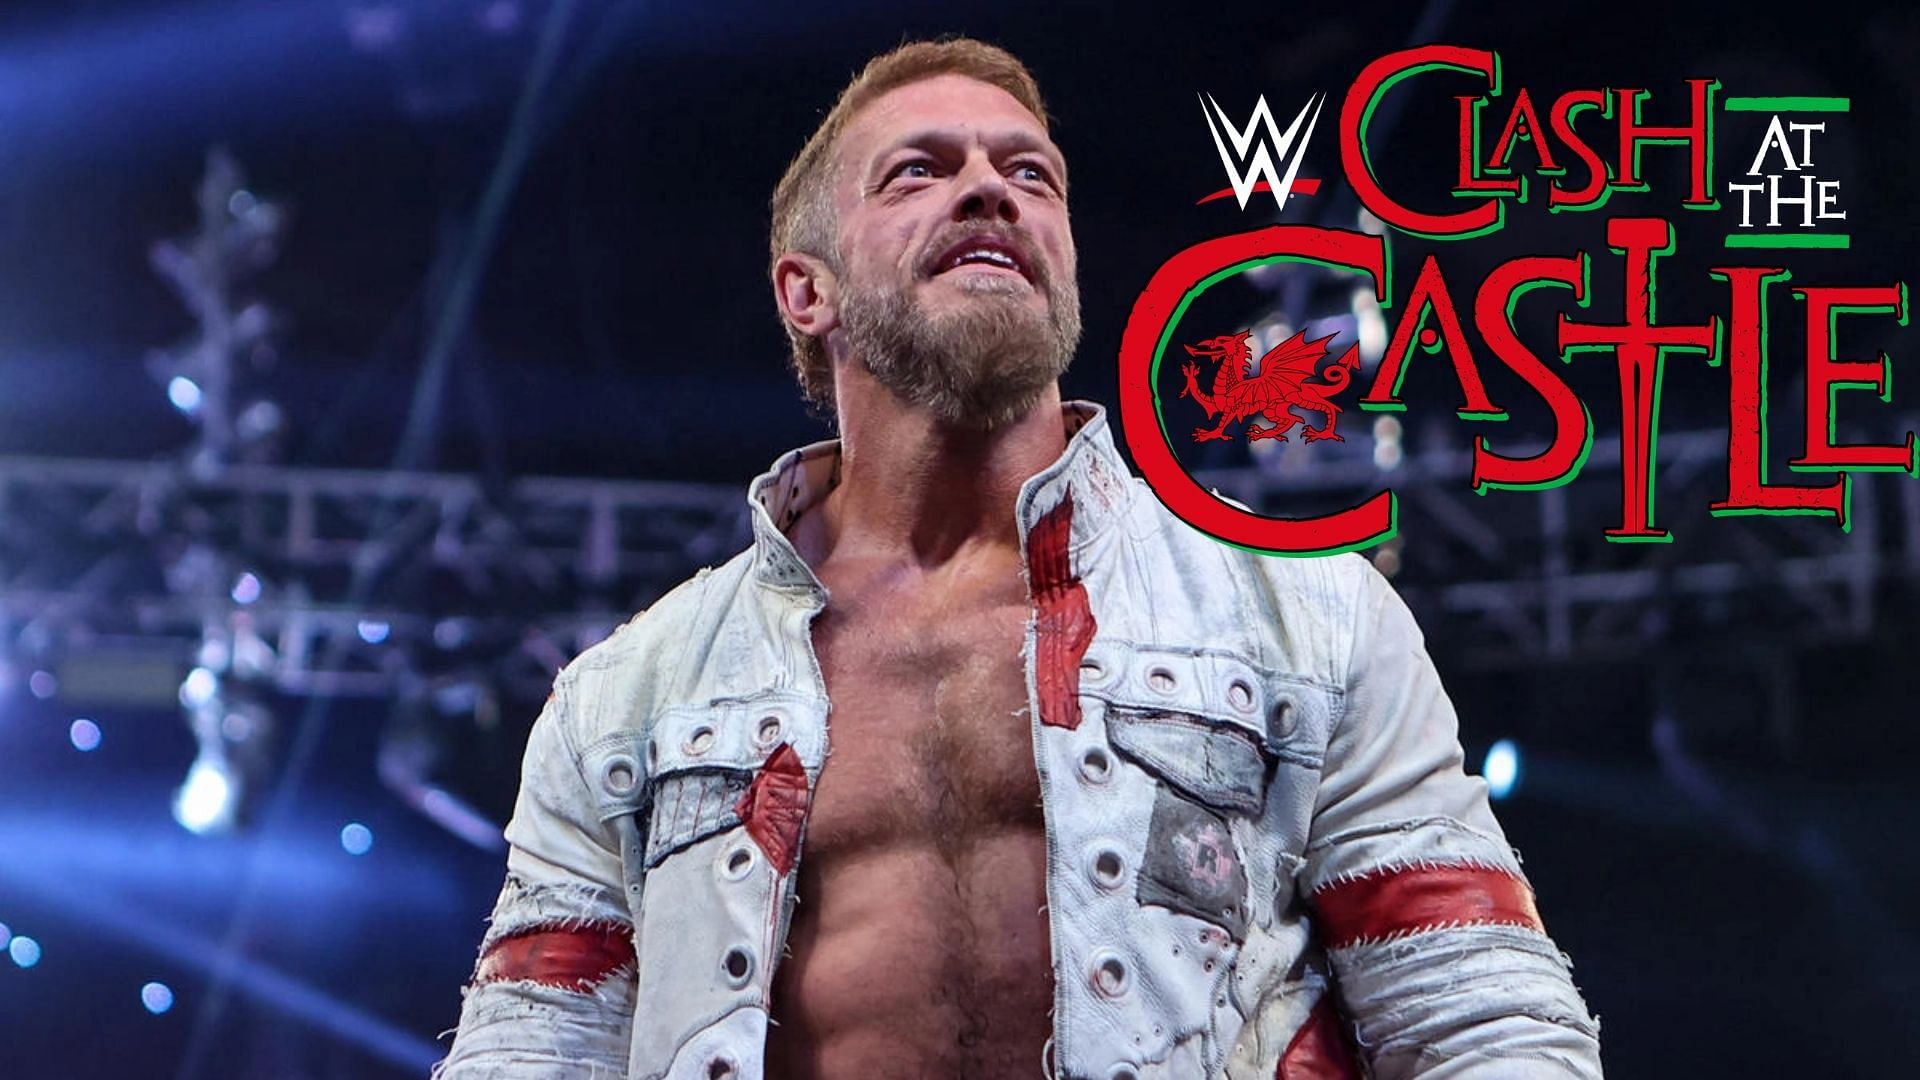 The Rated R Superstar does not have a match confirmed for Clash At The Castle.